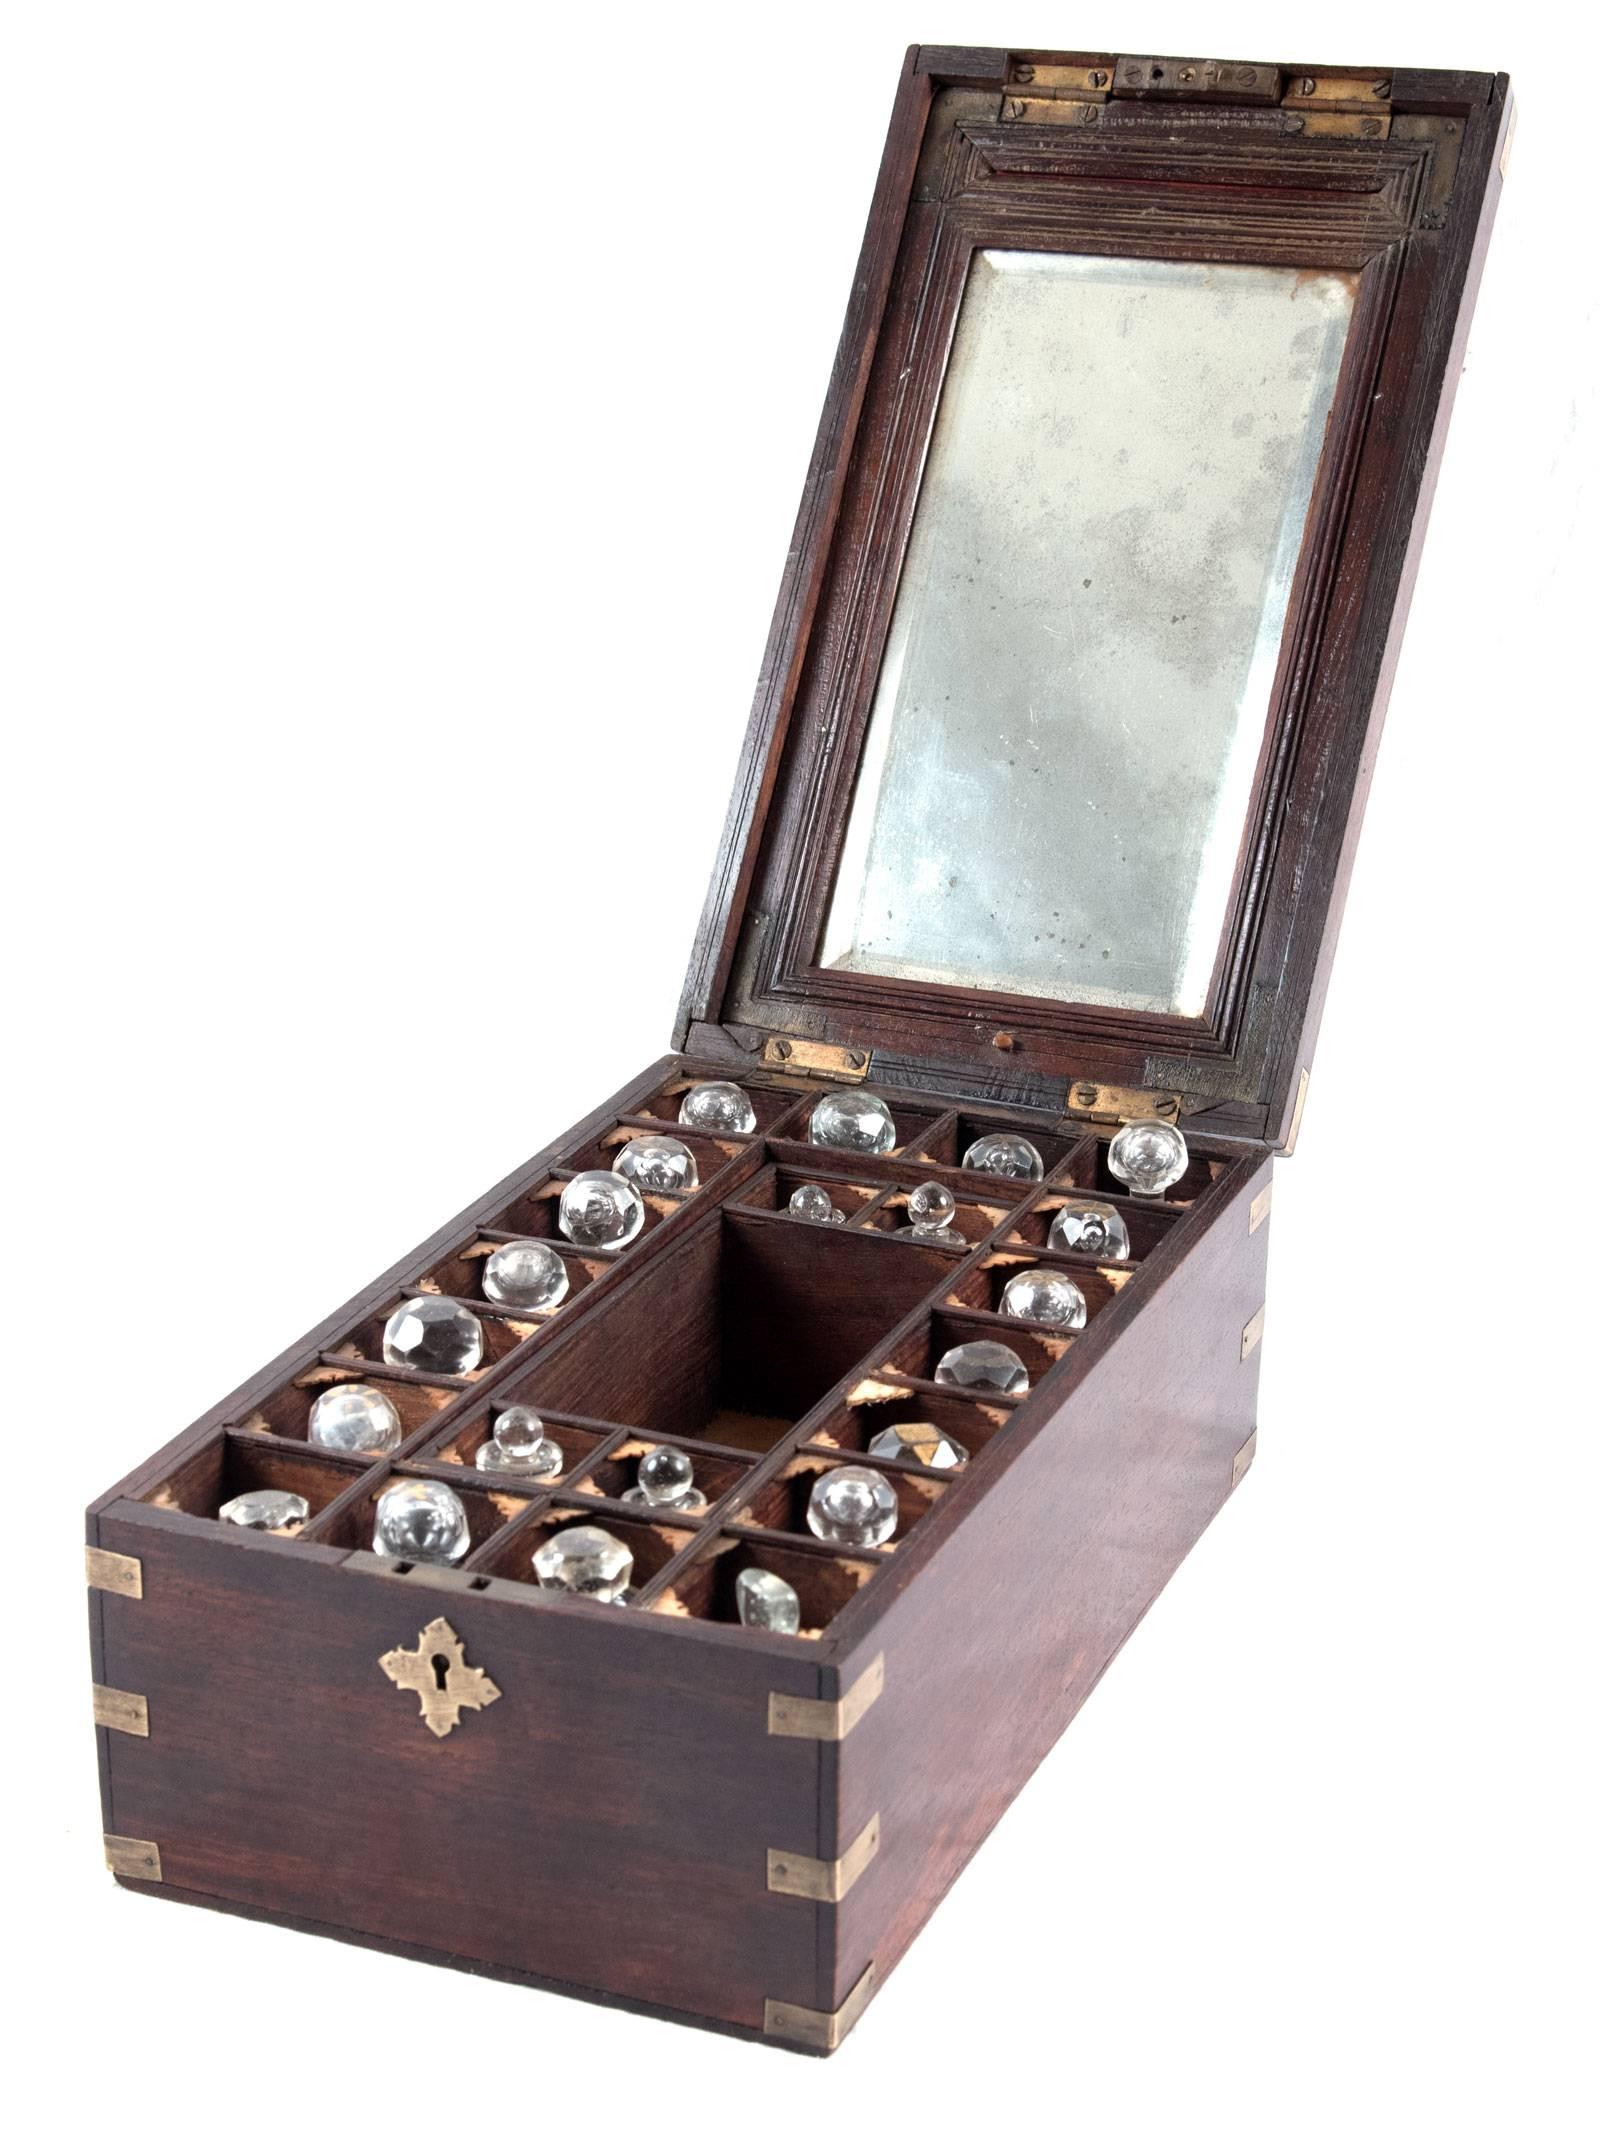 A mahogany apothecary box with a brass-trimmed lid that boarders an inlaid star motif. The box is fitted with a brass escutcheon, the corners edges of the box are fitted with brass mounts. The hinged lid lifts to reveal individual compartments for